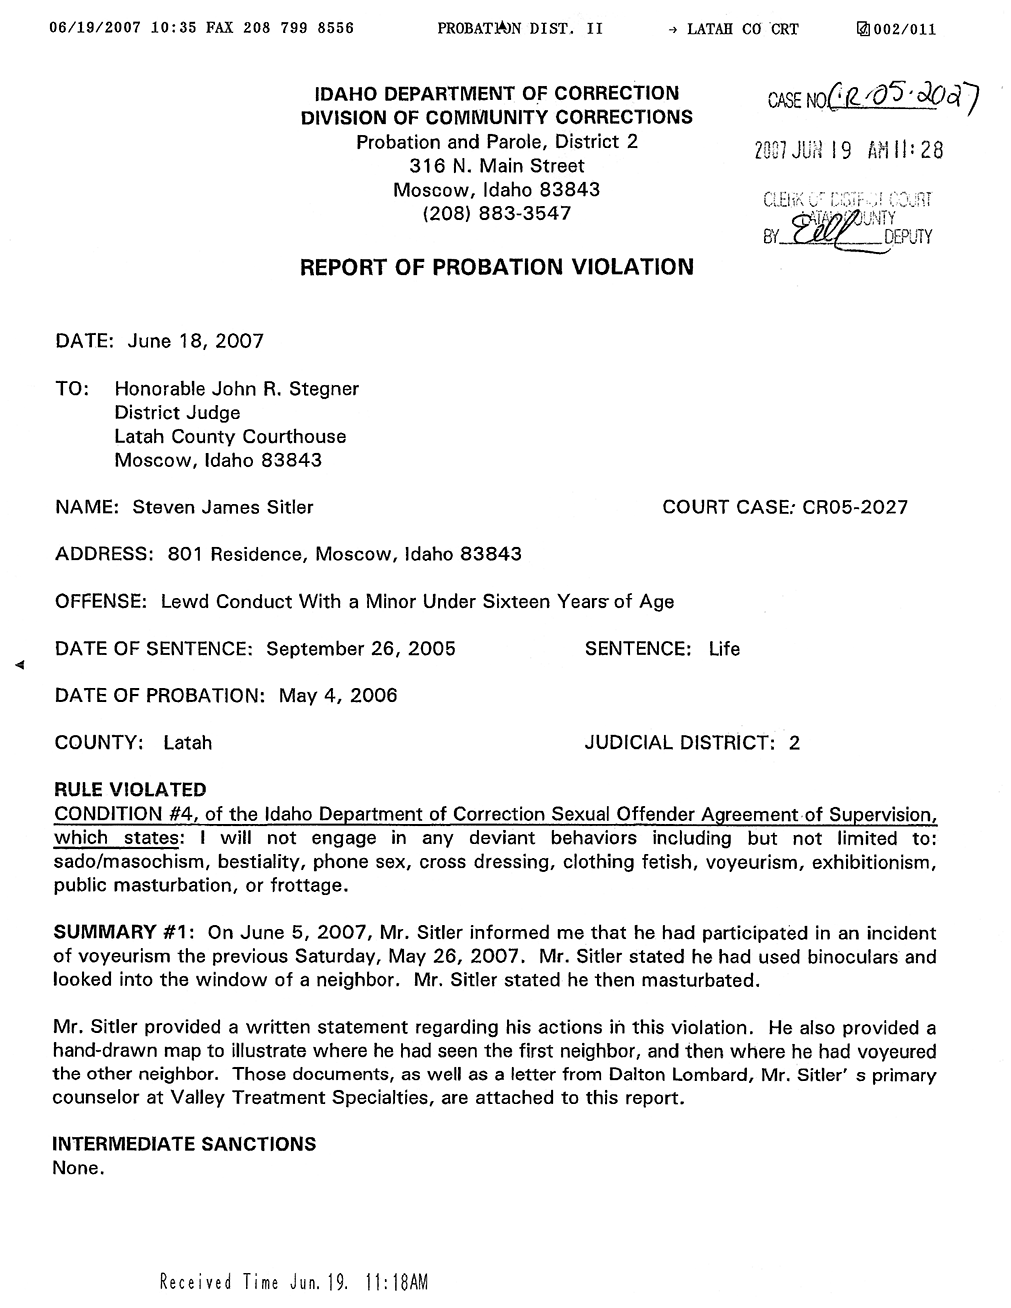 Report of Probation Violation page 1